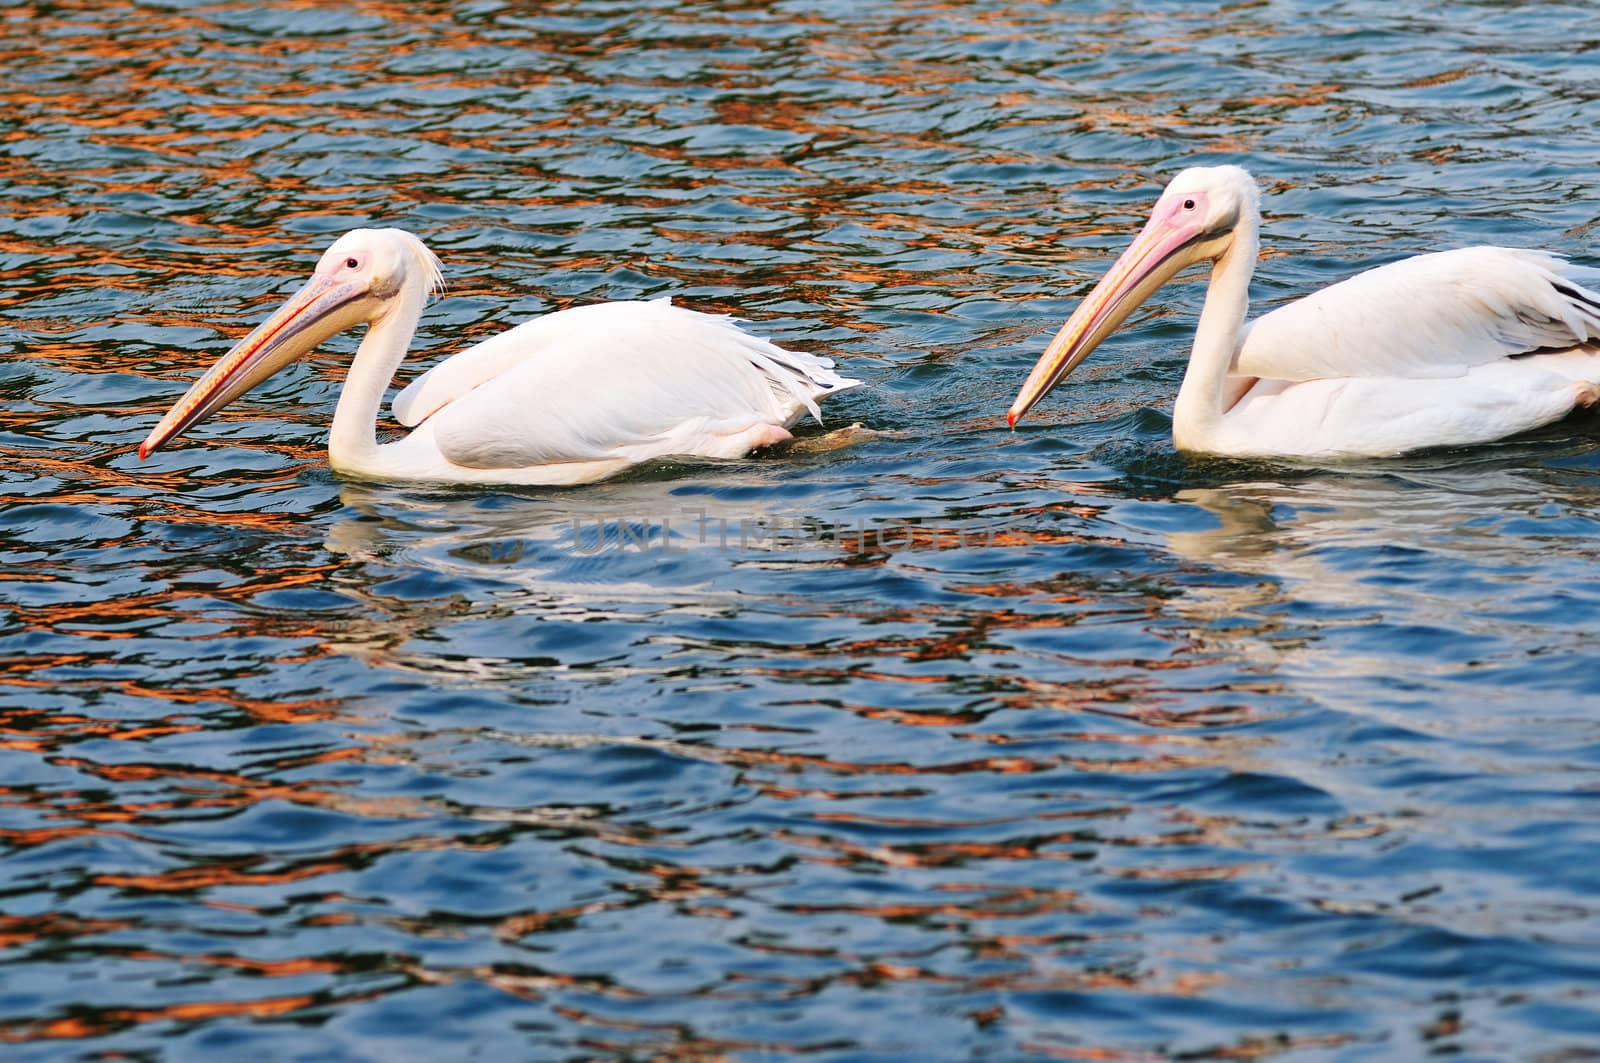 Two pelican birds swimming in the pool